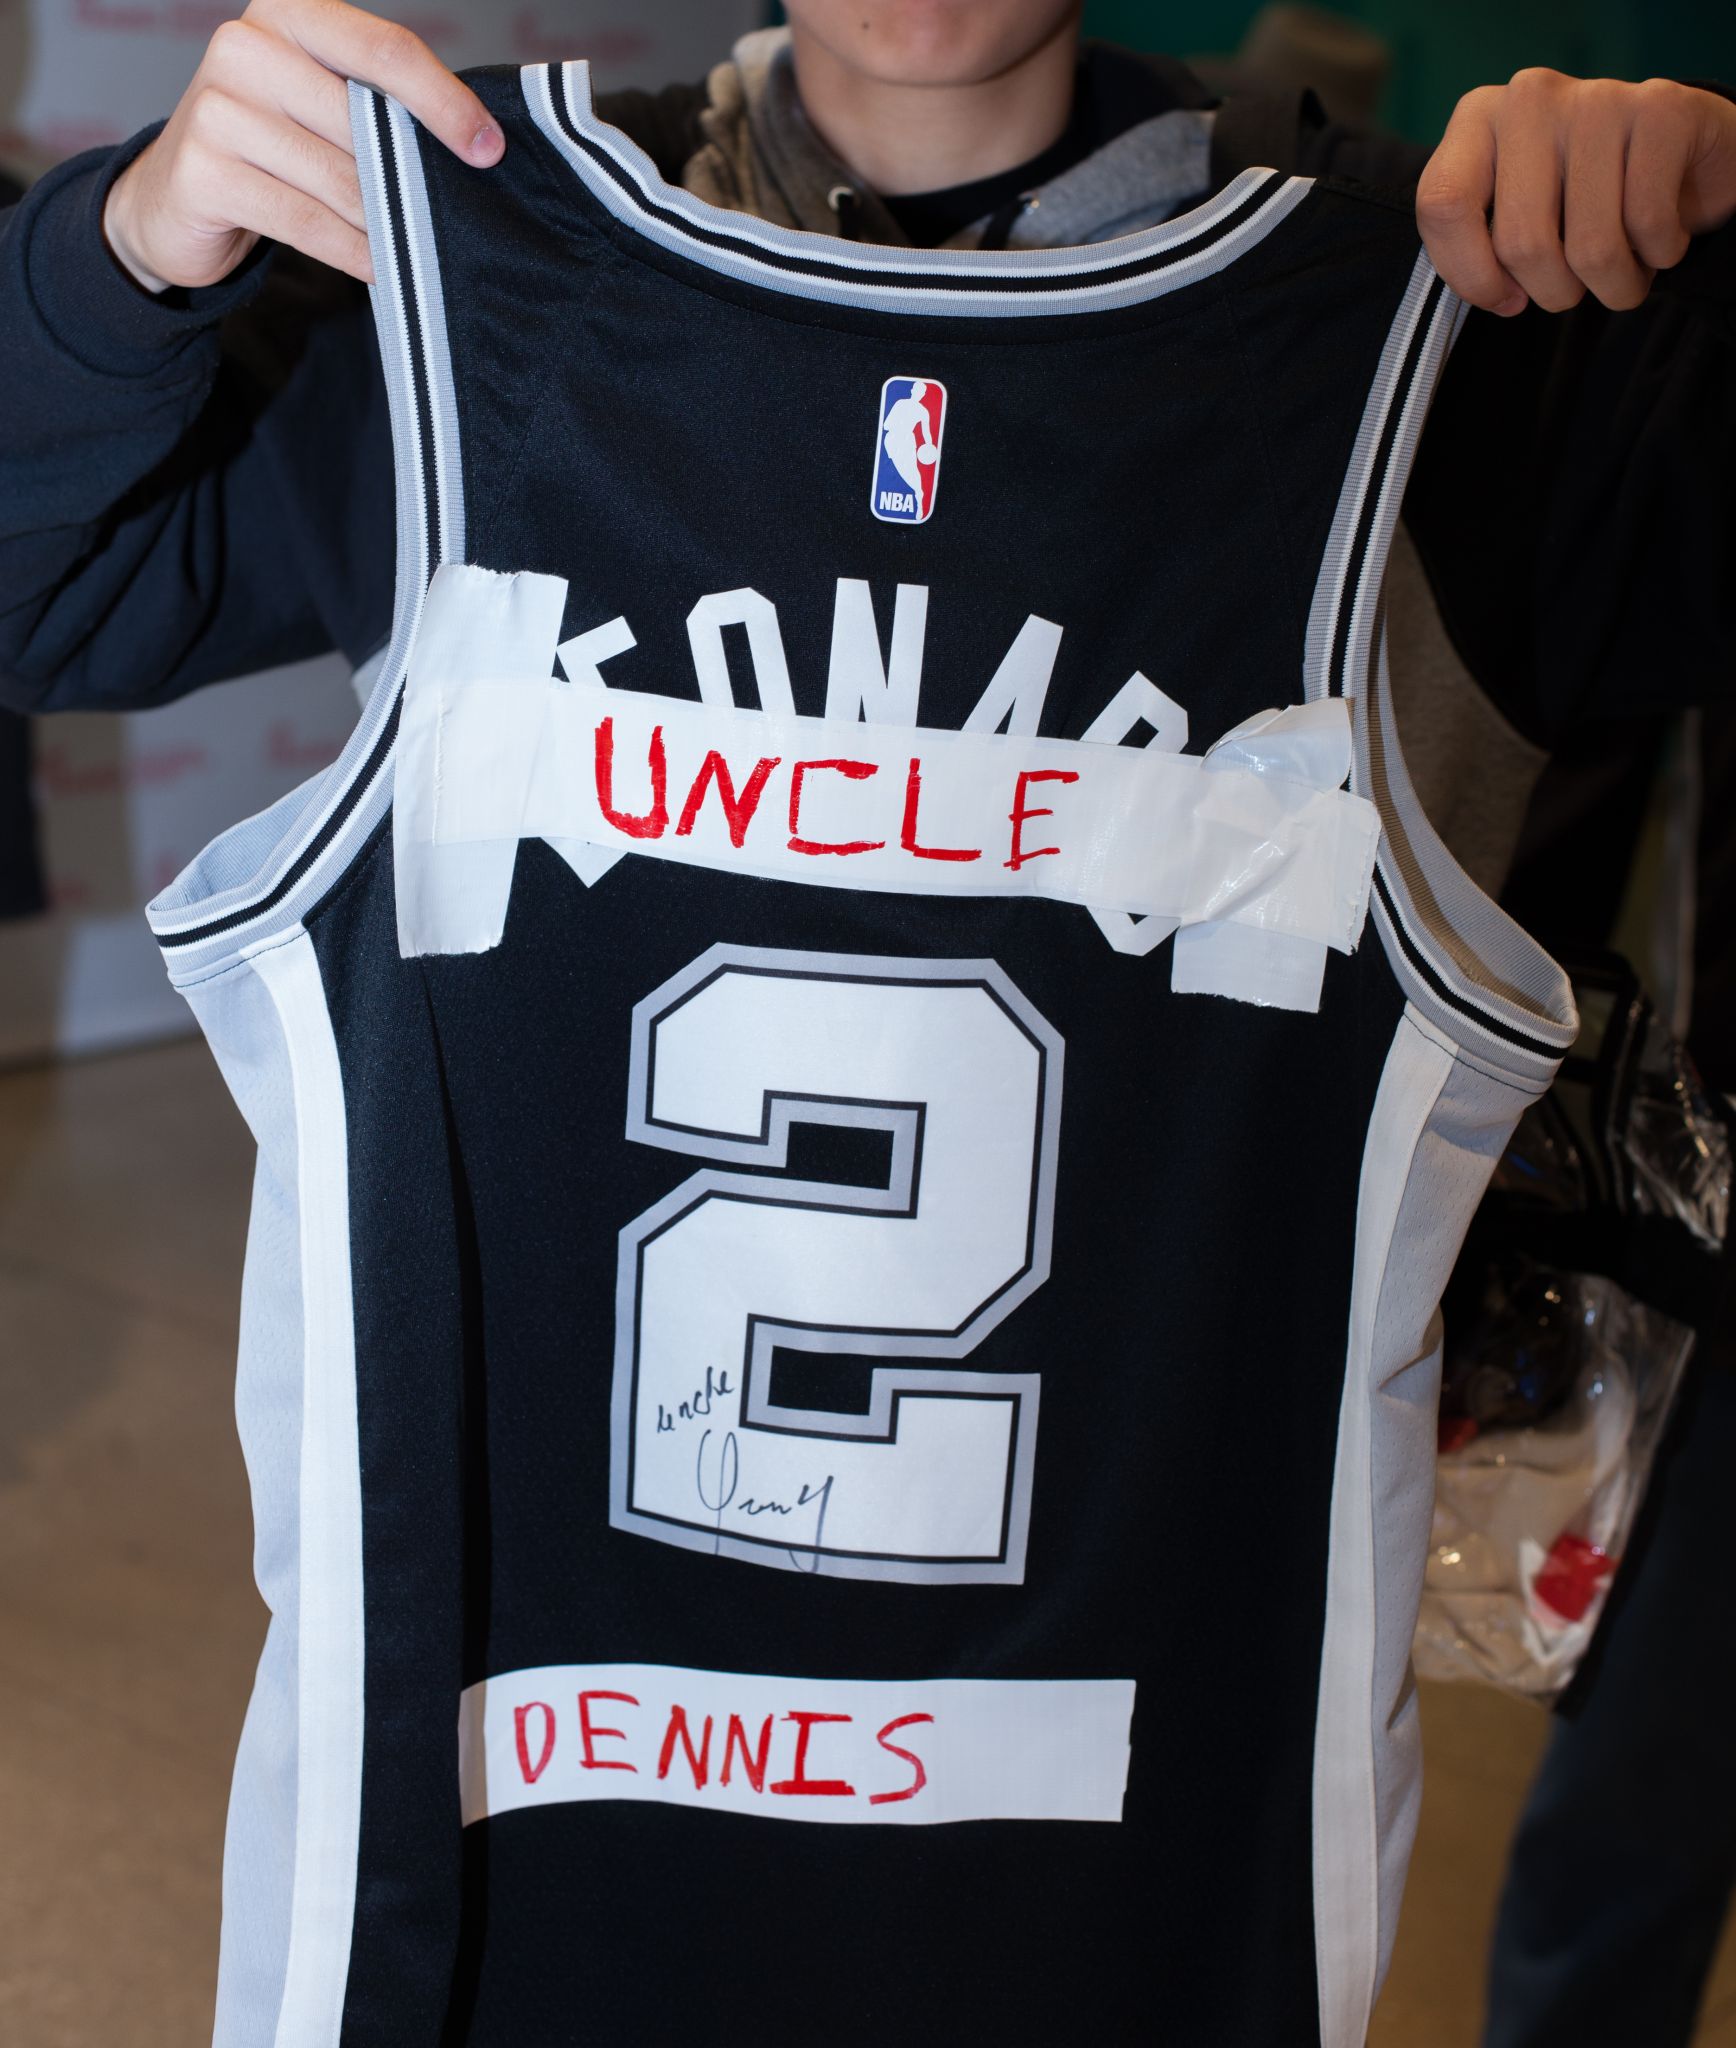 Photos show the signs, jersey alterations made by Spurs fans to troll Kawhi  Leonard